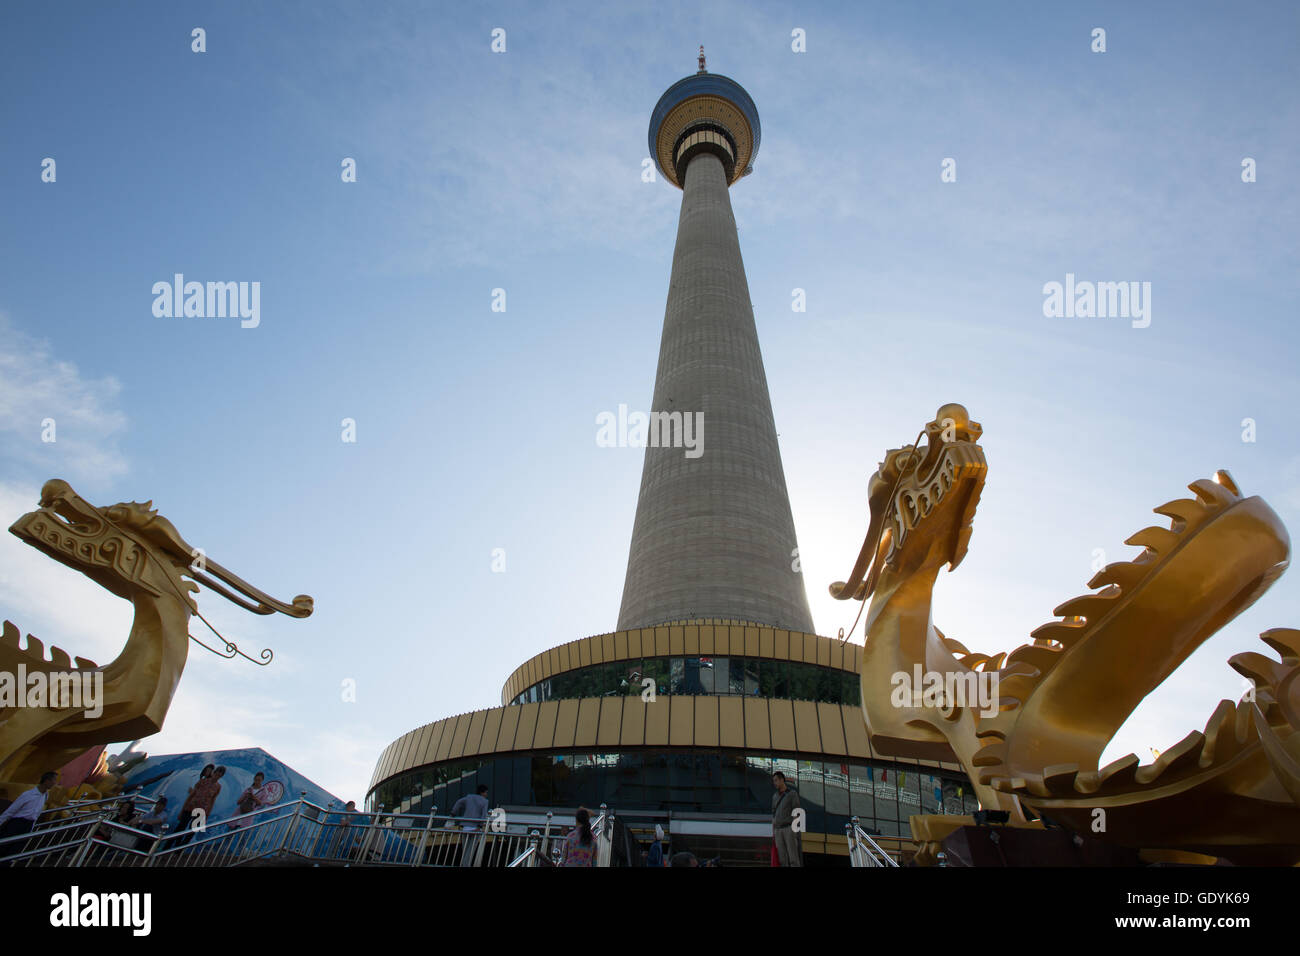 China Central Television Tower, Beijing, China Stock Photo